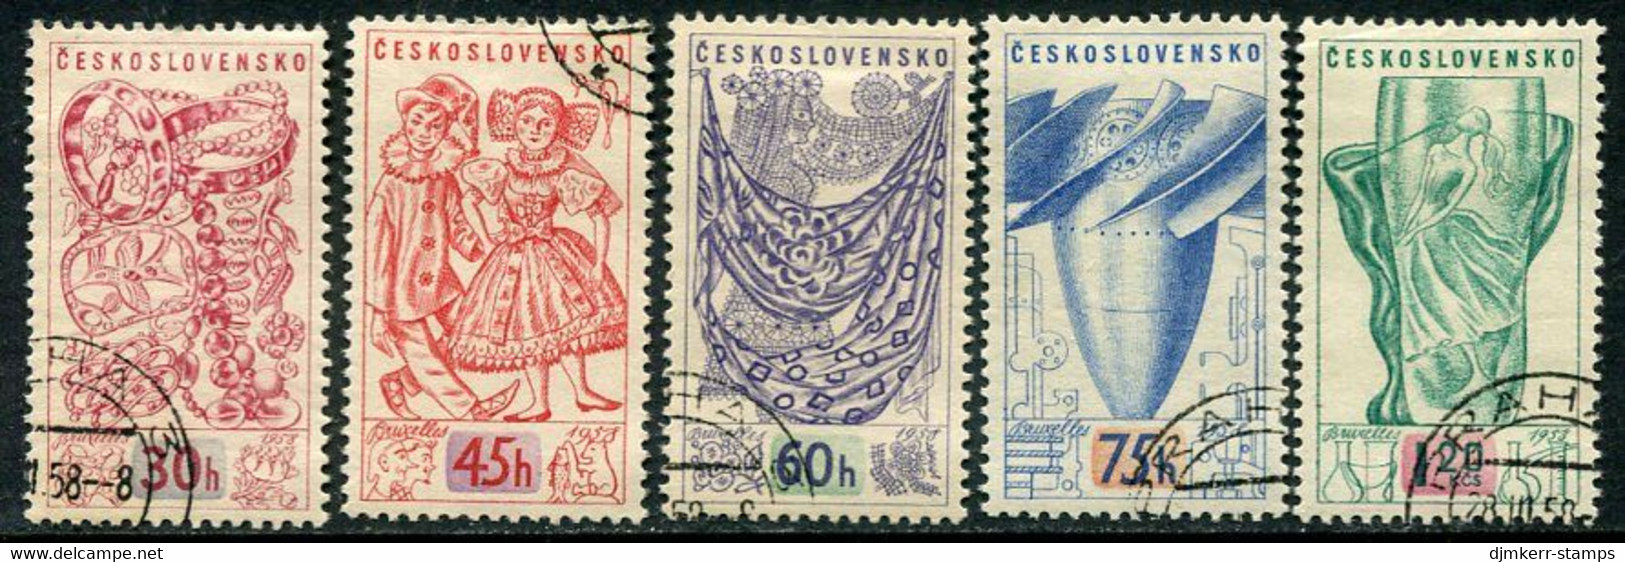 CZECHOSLOVAKIA 1958 World Expo, Brussels Used   Michel 1068-72 - Used Stamps